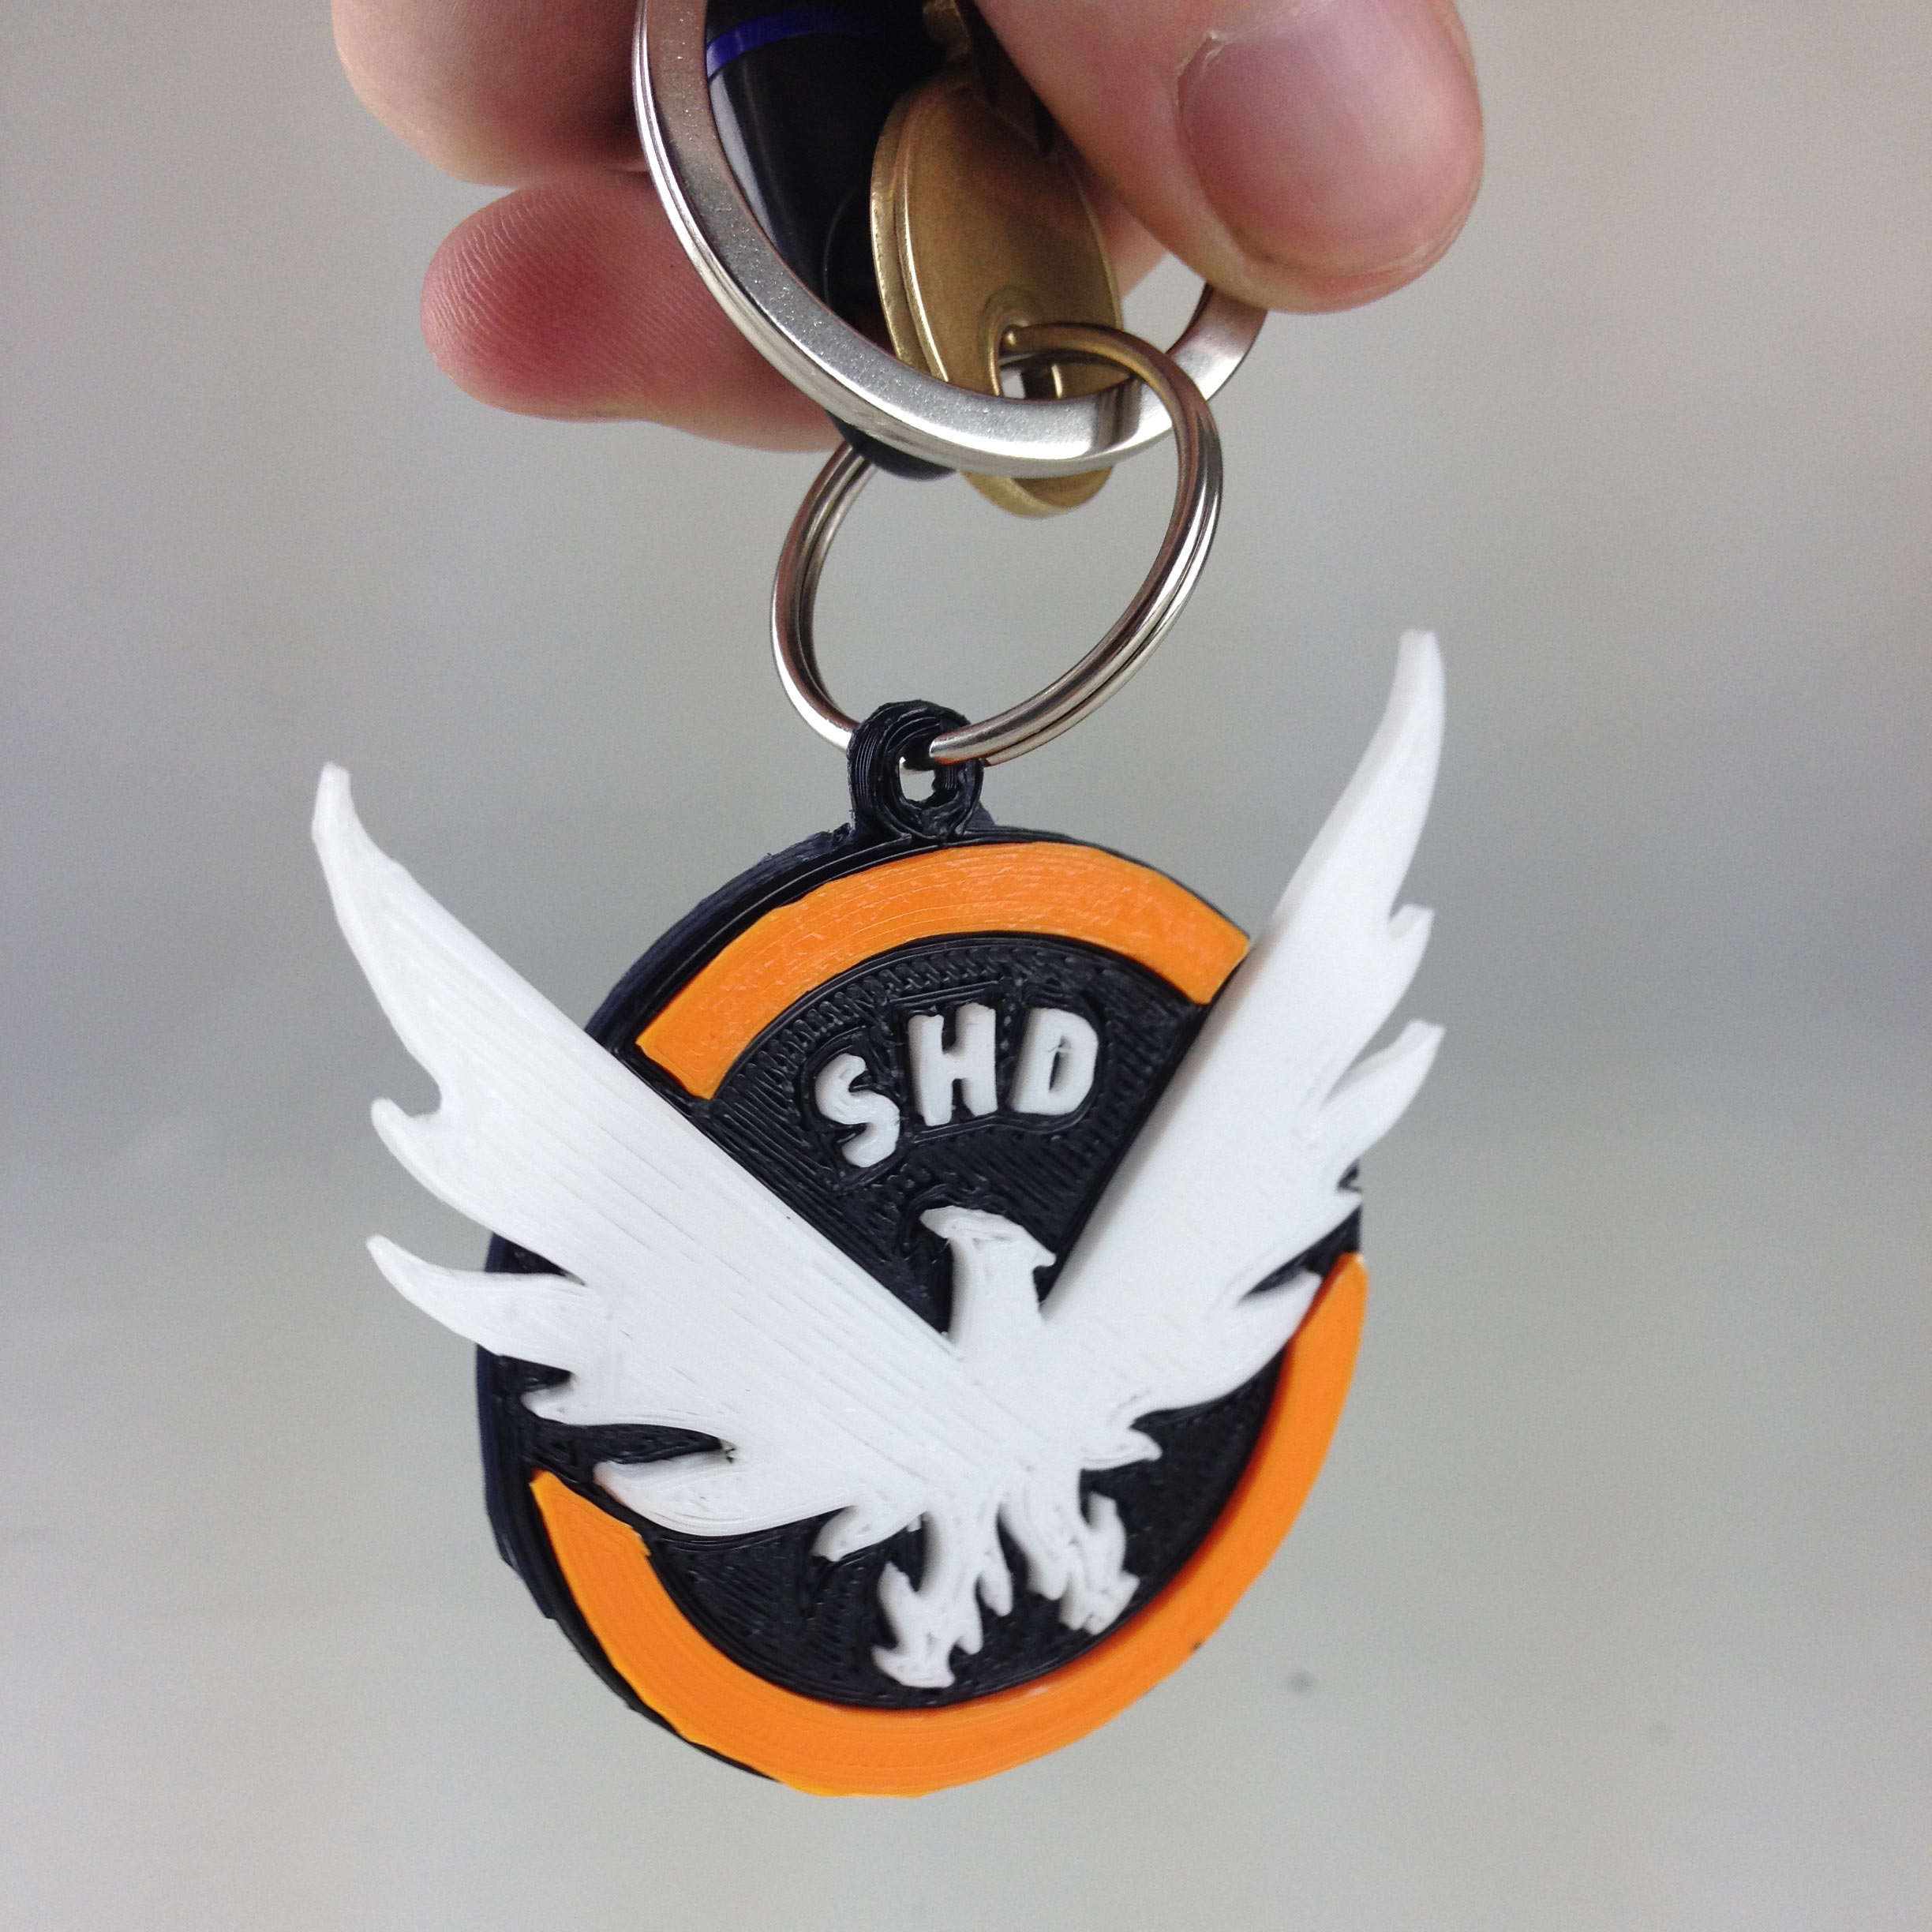 The Division Key Ring